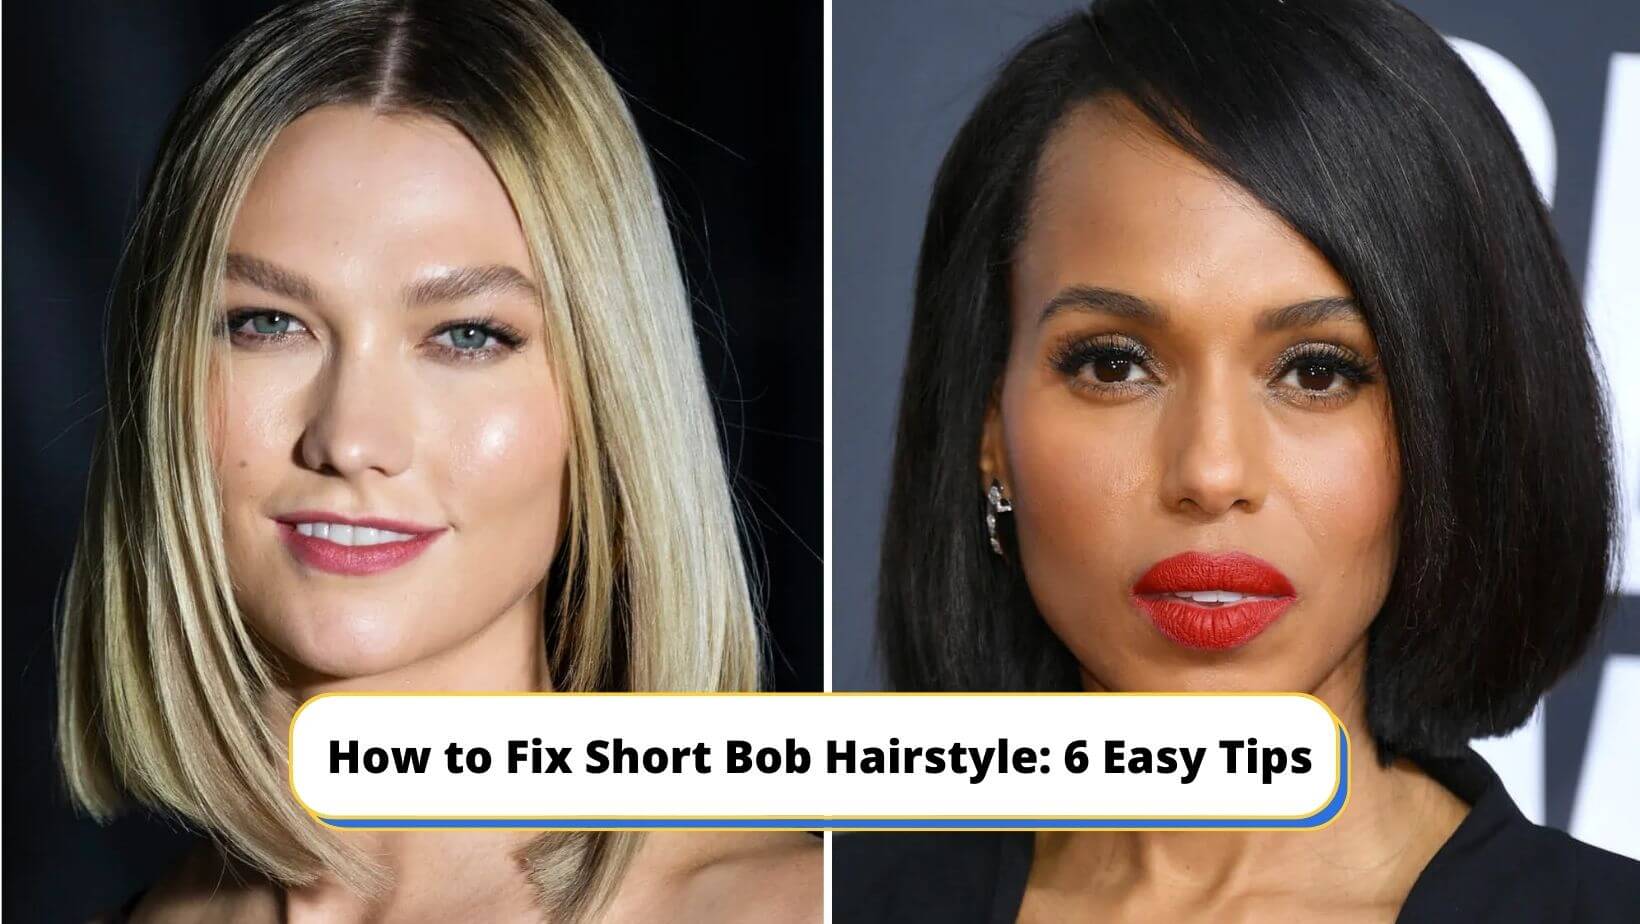 How to Fix Short Bob Hairstyle